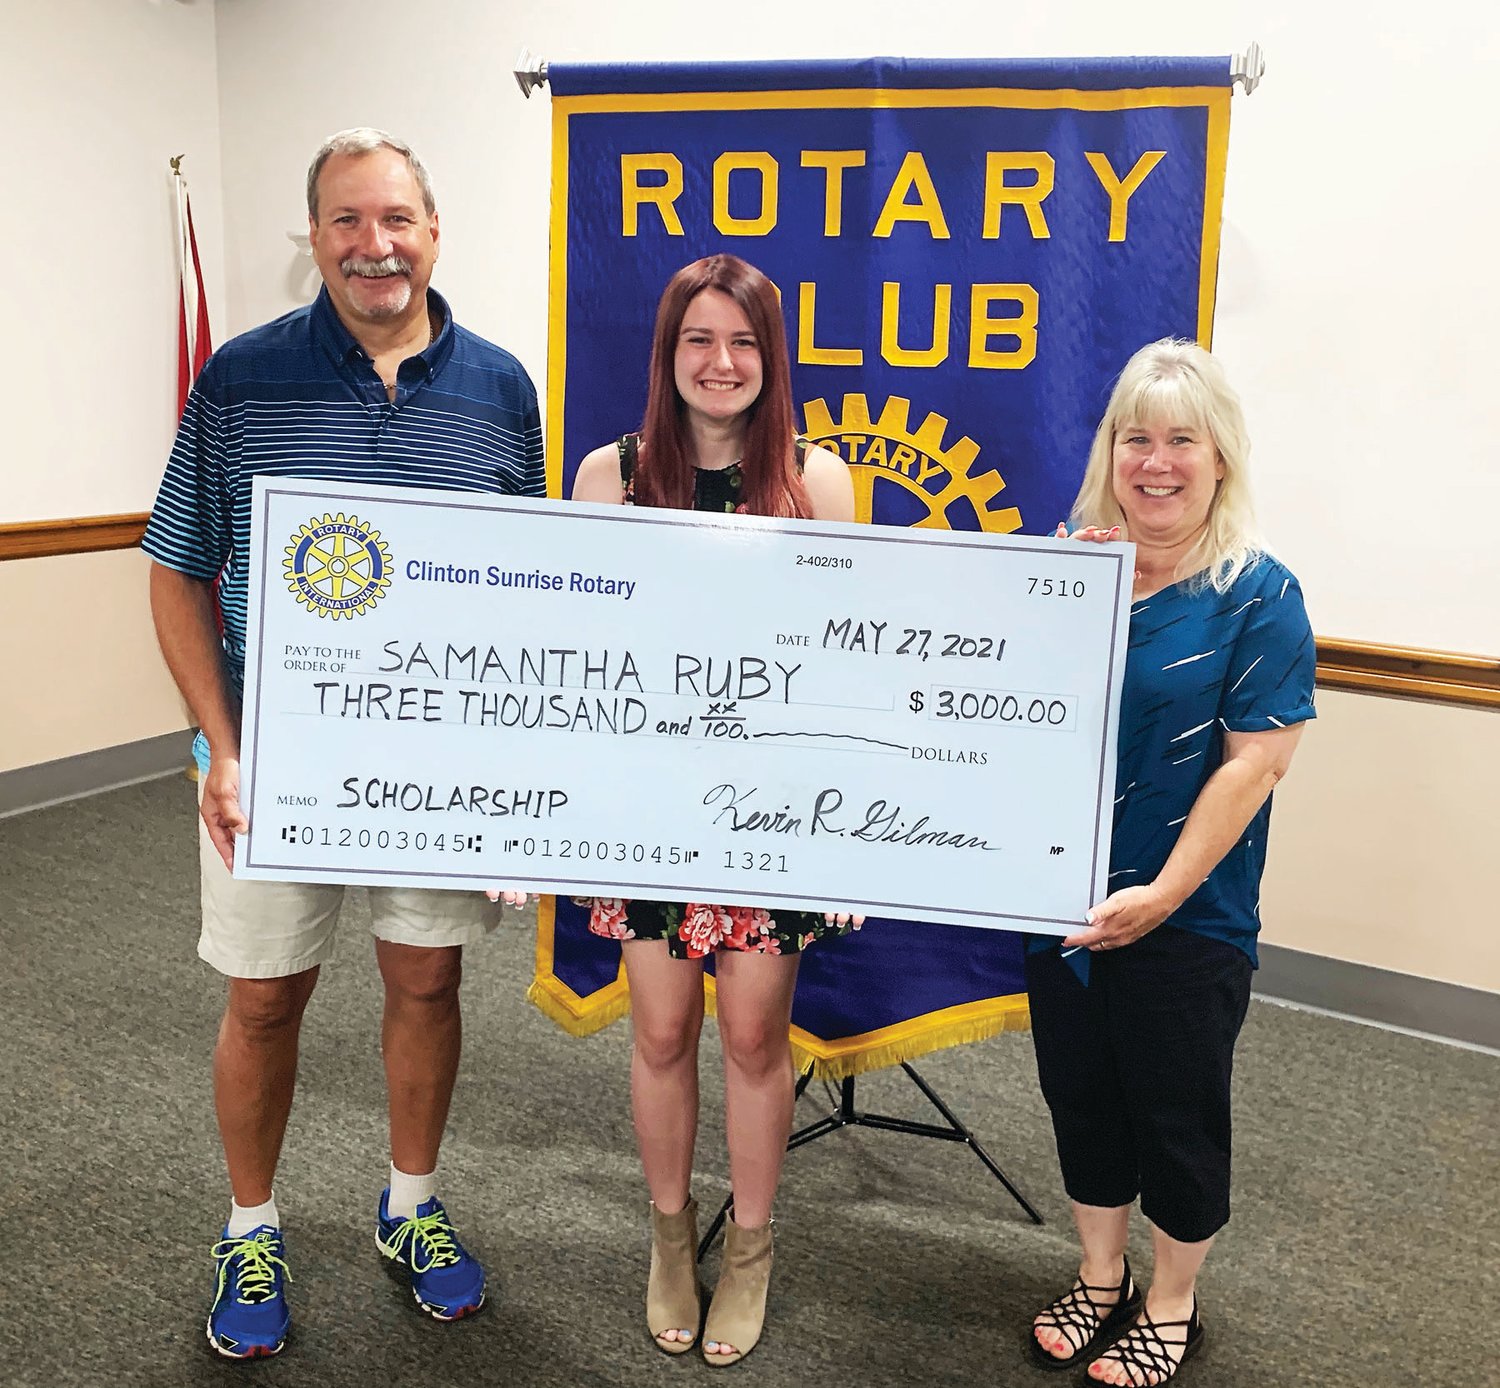 Hunterdon County Polytech pre-nursing senior Samantha Ruby, center, receives a scholarship from Clinton Sunrise Rotary flanked by her parents, Richard, left, and Beth, right.